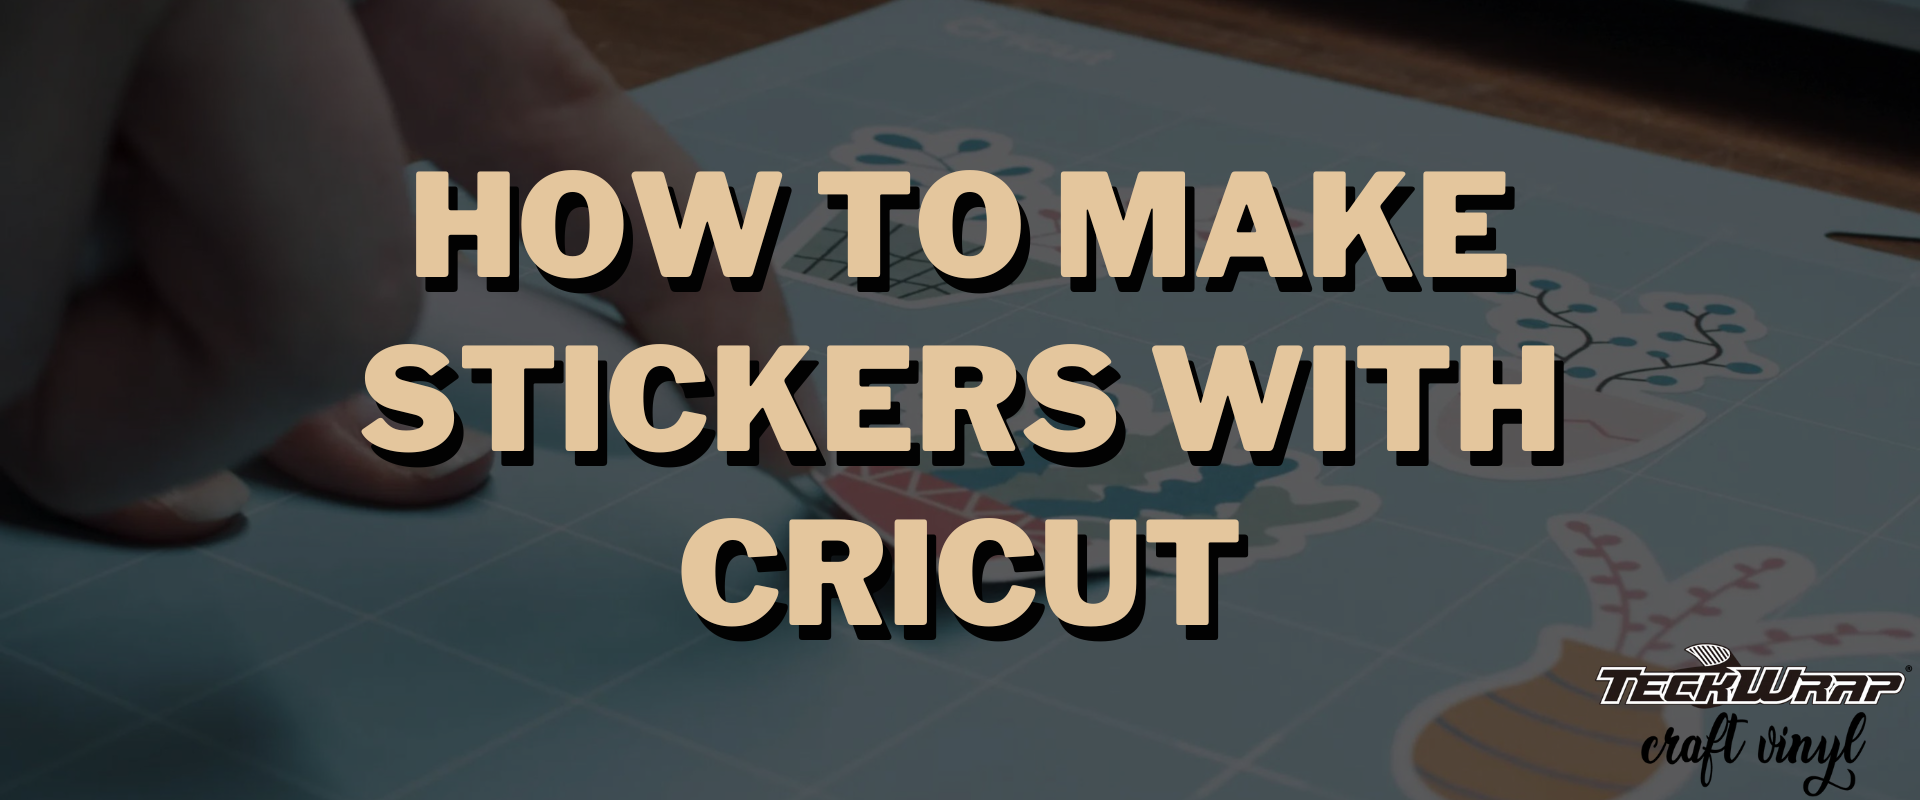 How To Make Stickers With Cricut - A Comprehensive Guide– TeckwrapCraft